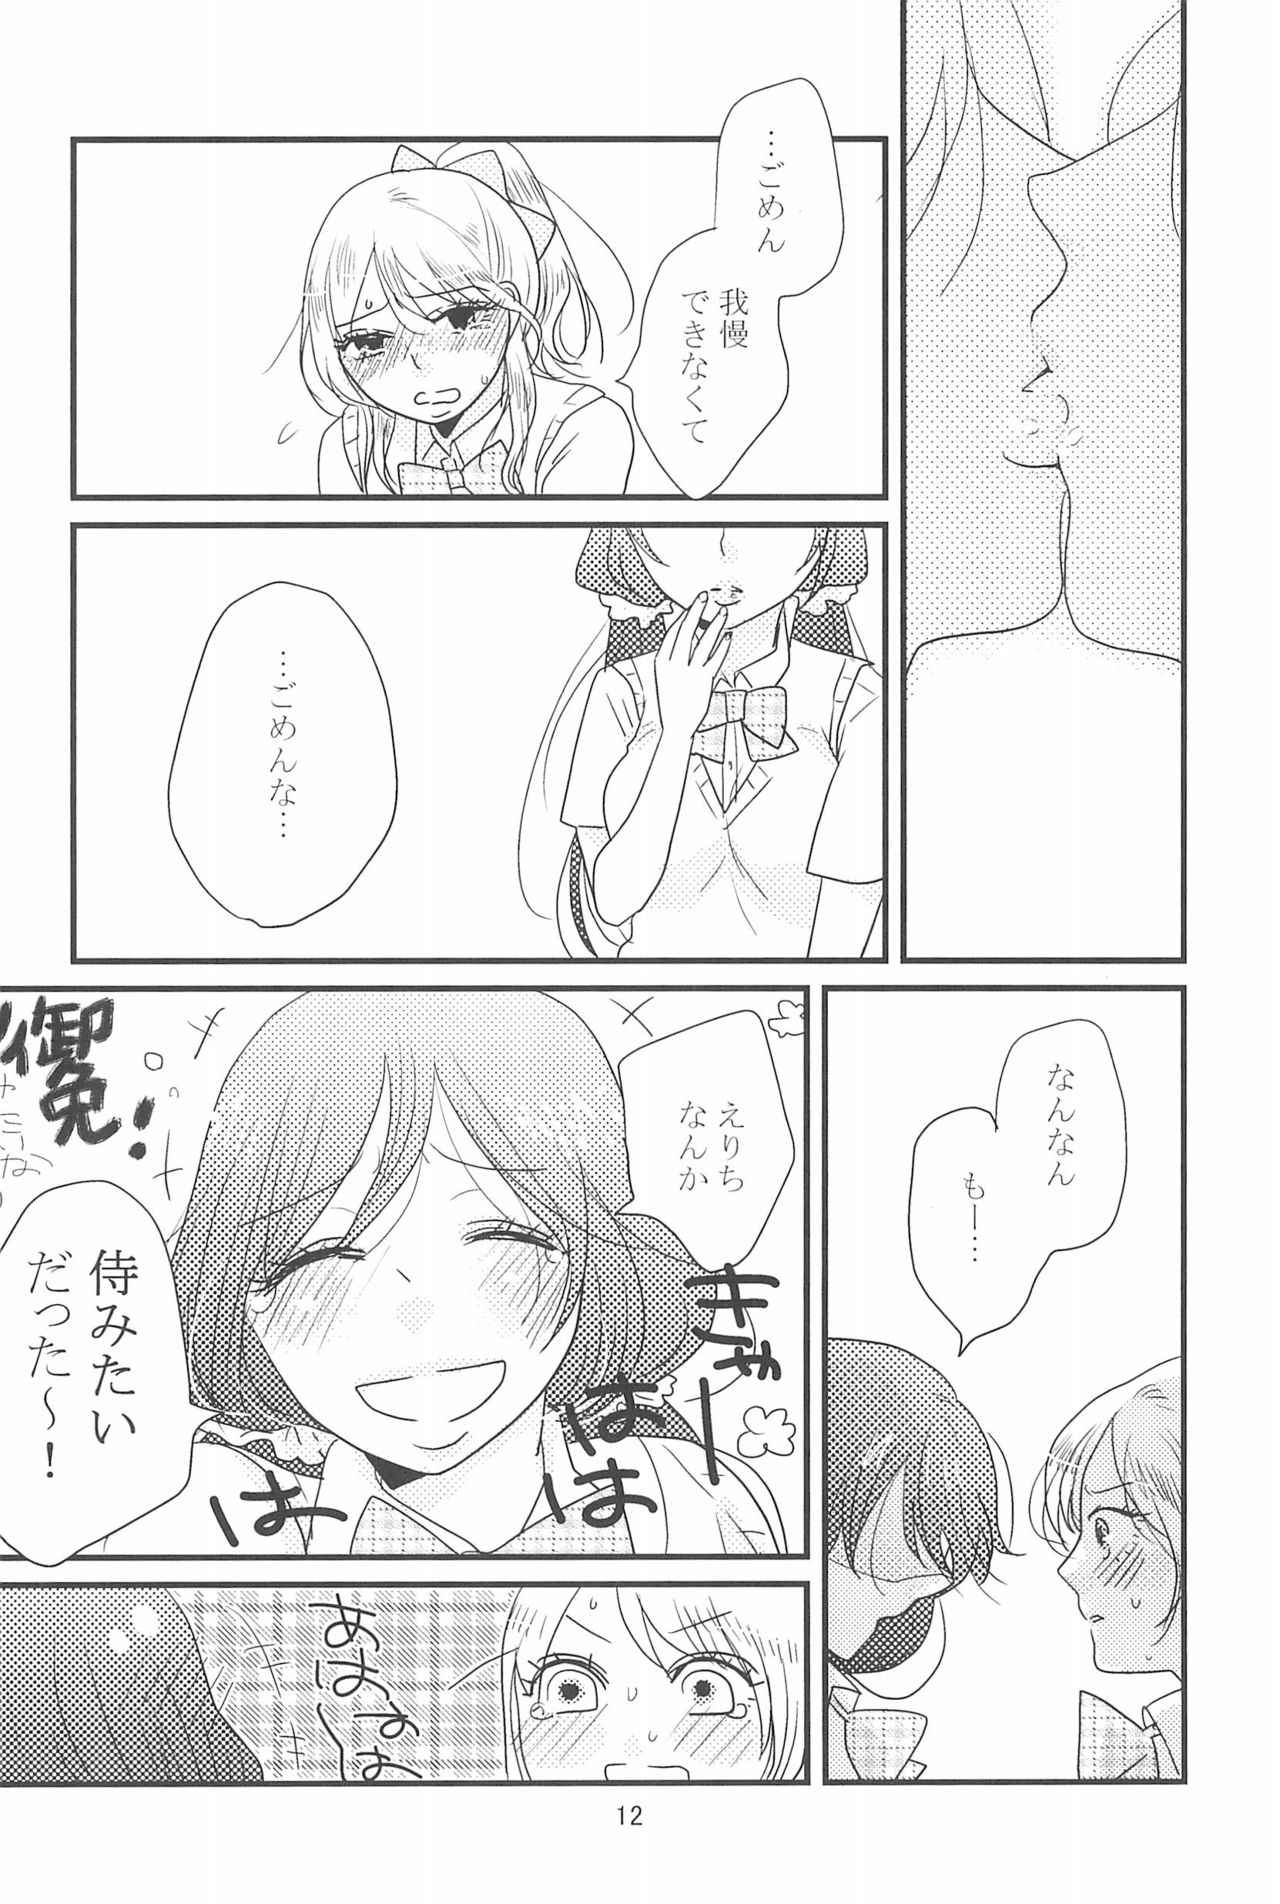 (C90) [BK*N2 (Mikawa Miso)] HAPPY GO LUCKY DAYS (Love Live!) page 16 full